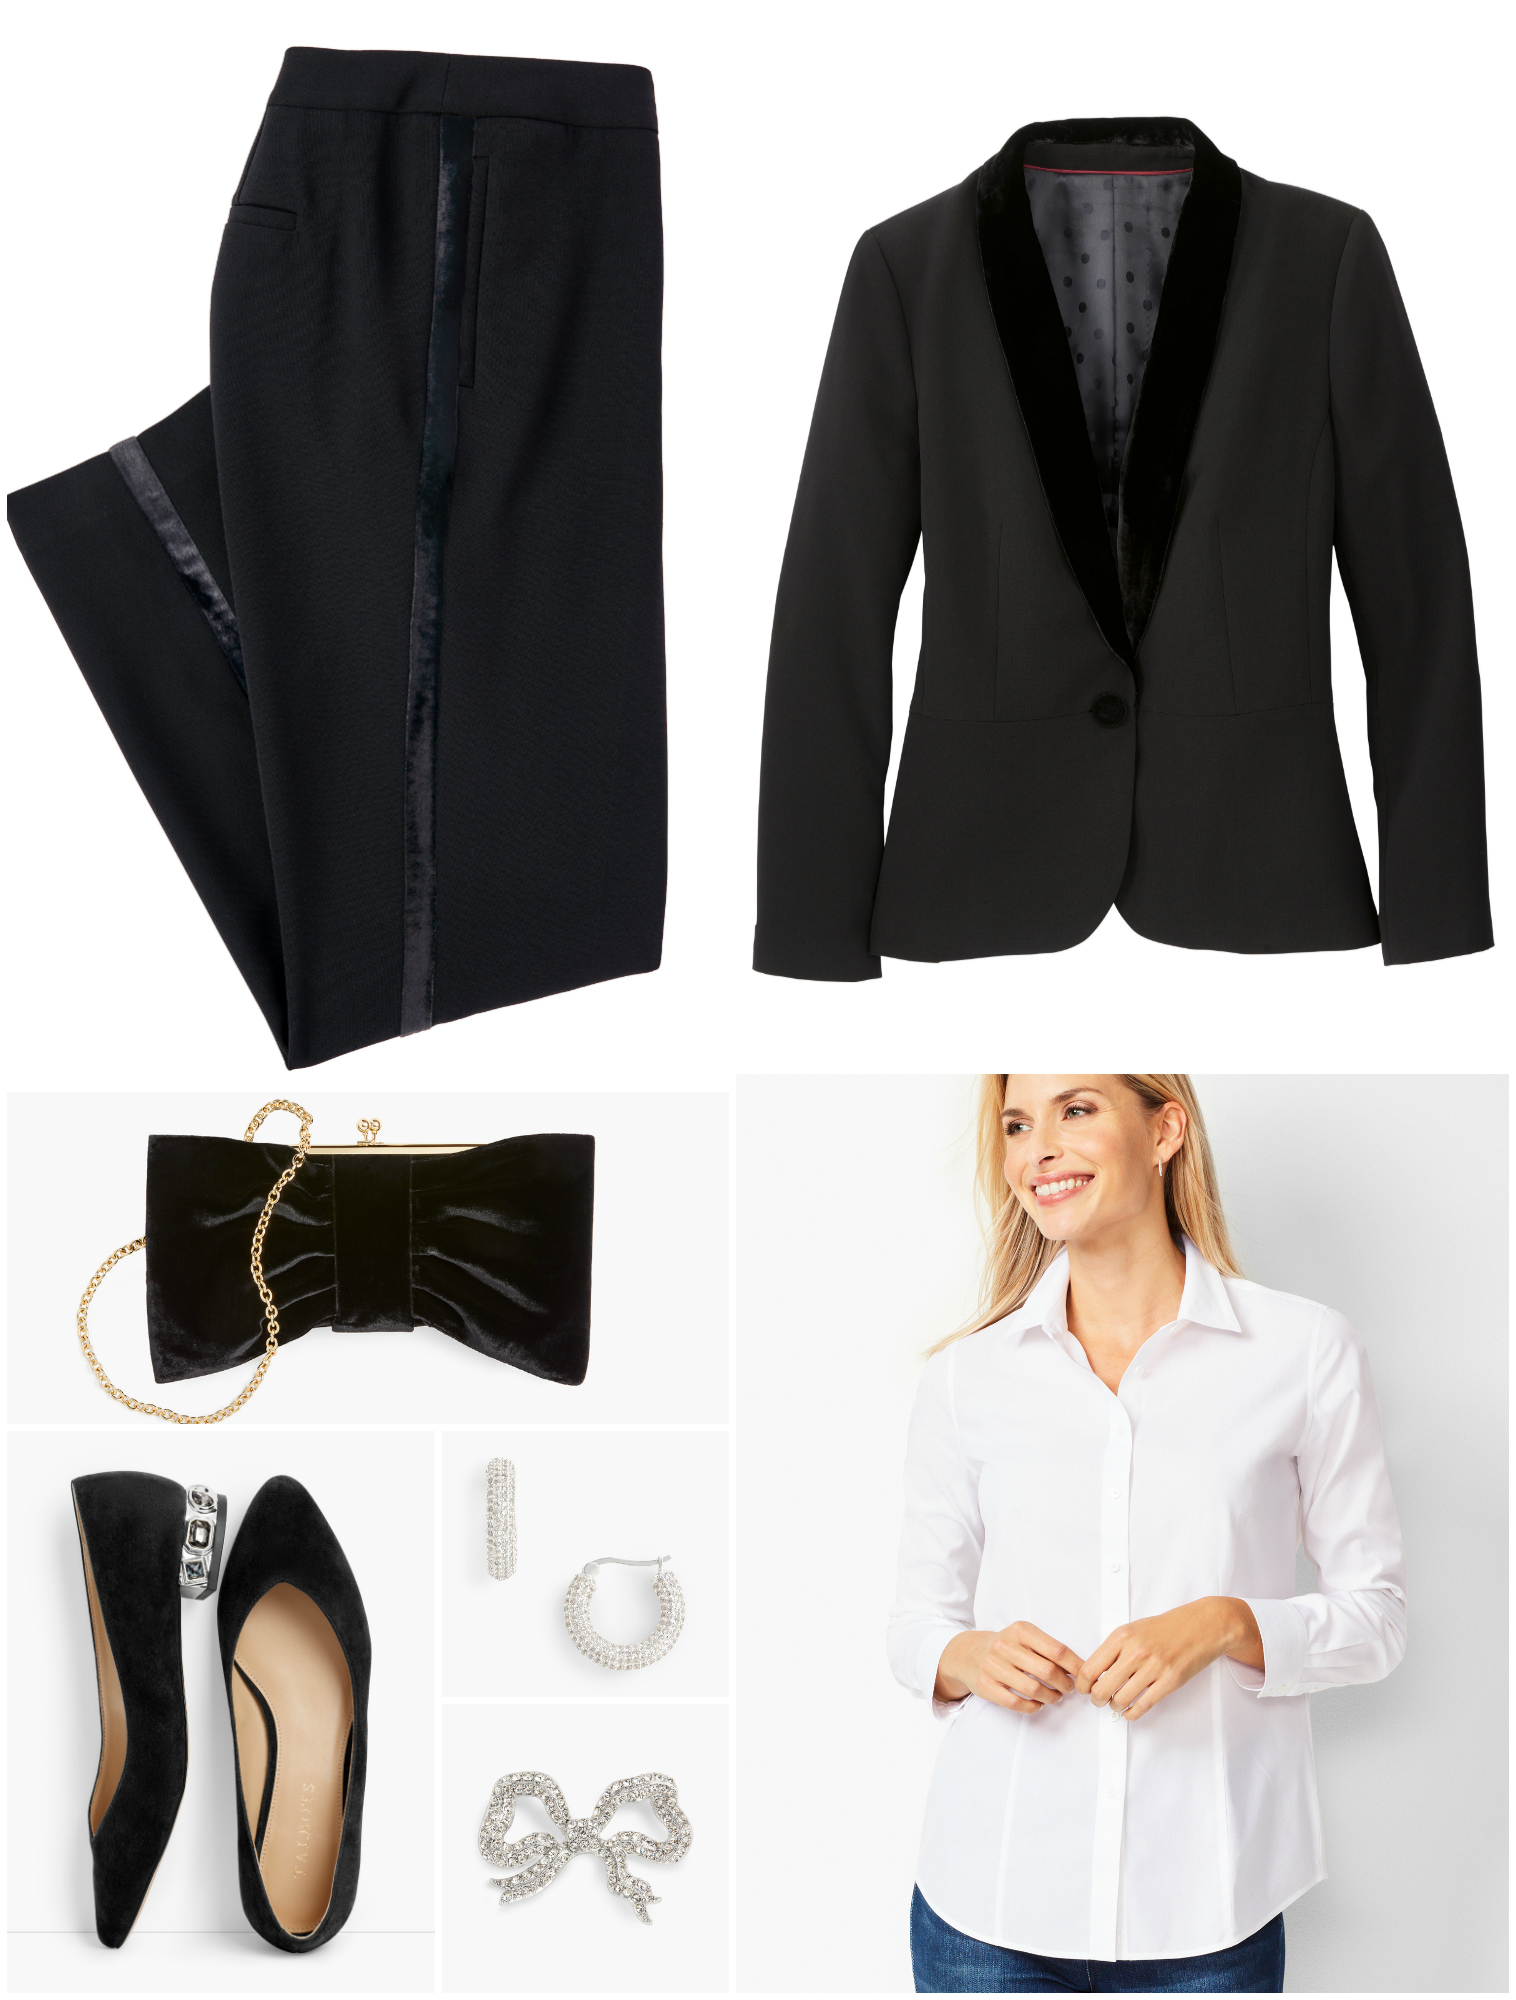 By switching out the velvet tank for a white shirt, you create a look that is more menswear-inspired but just as elegant.  Button up the shirt and pin the brooch at the top to replicate a bow tie.